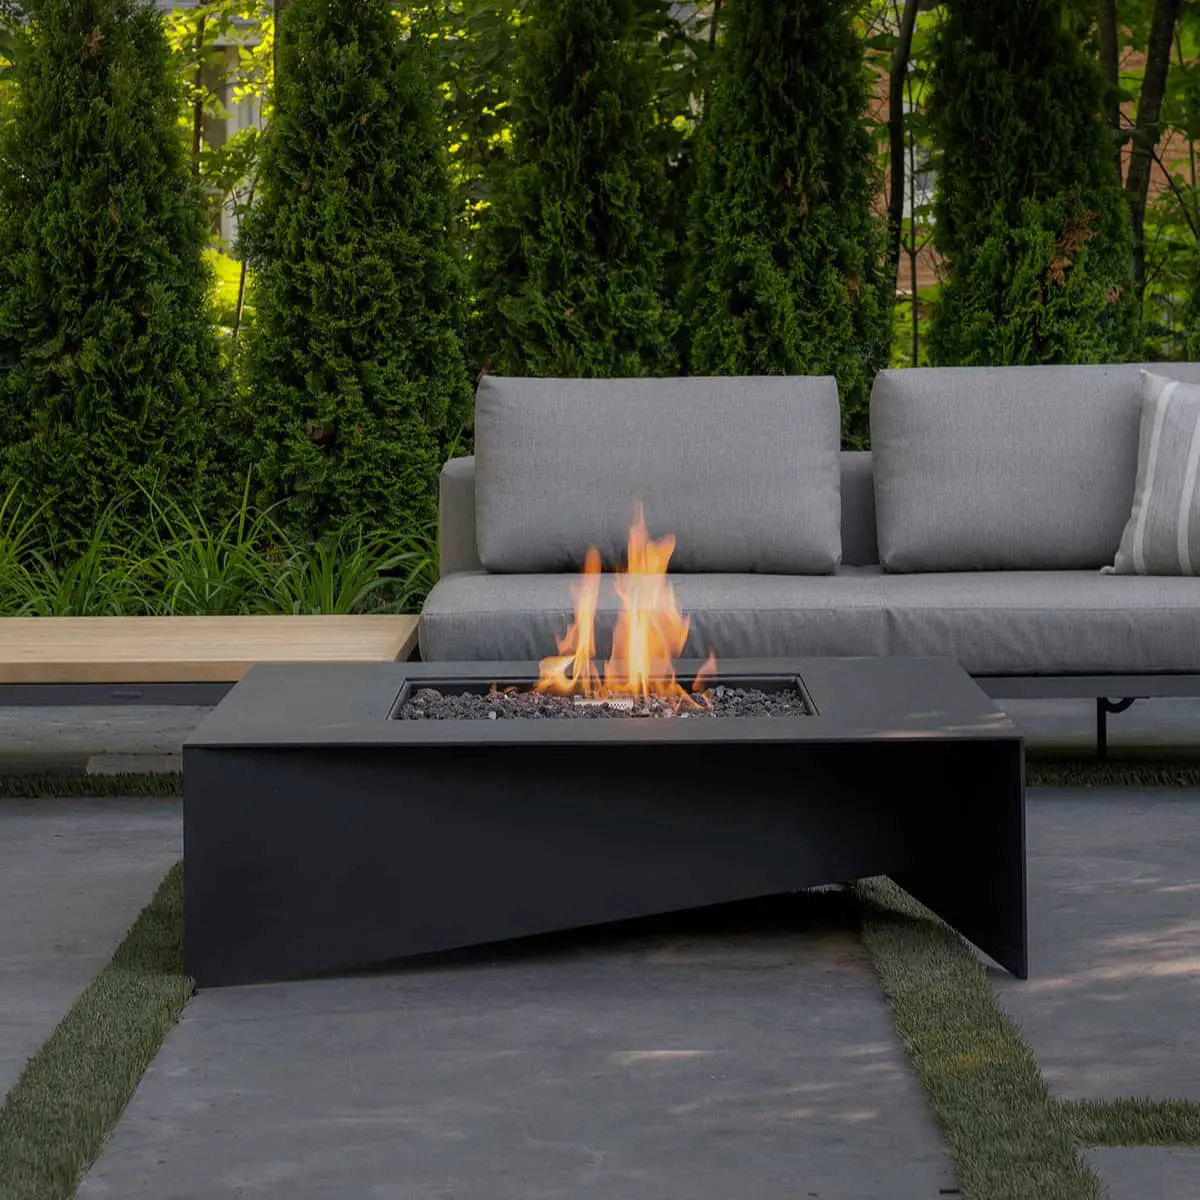 Ultimate Fire Pit Outdoor Fireplace, How To Protect Concrete From Fire Pit